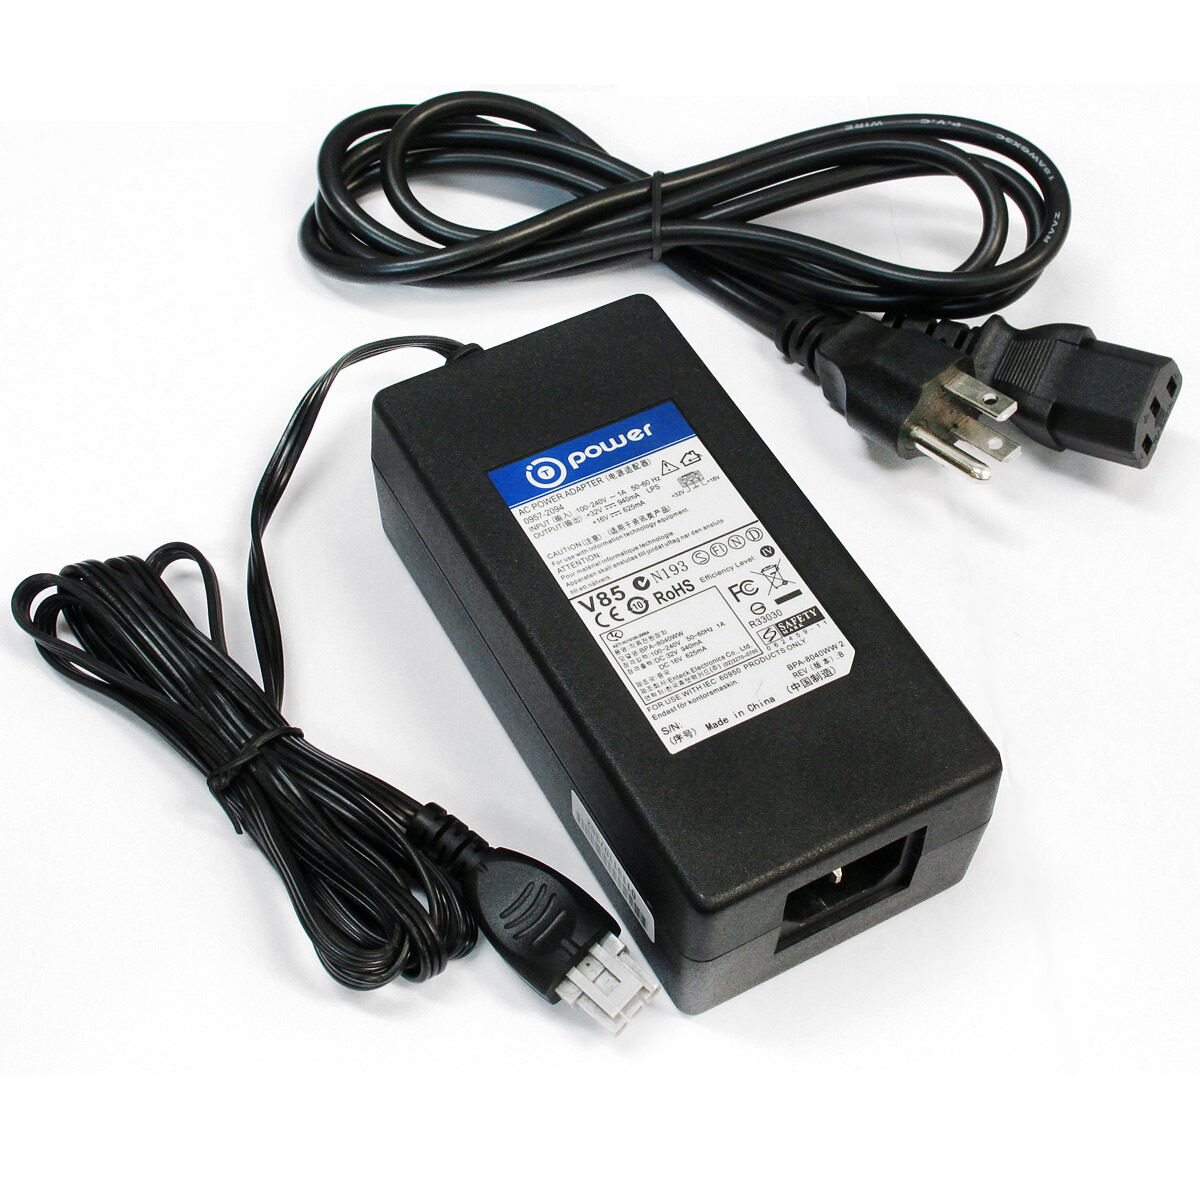 Ac adapter for HP Photosmart C5280 All-in-One Printer/Scanner/Copier Q8330A#ABA